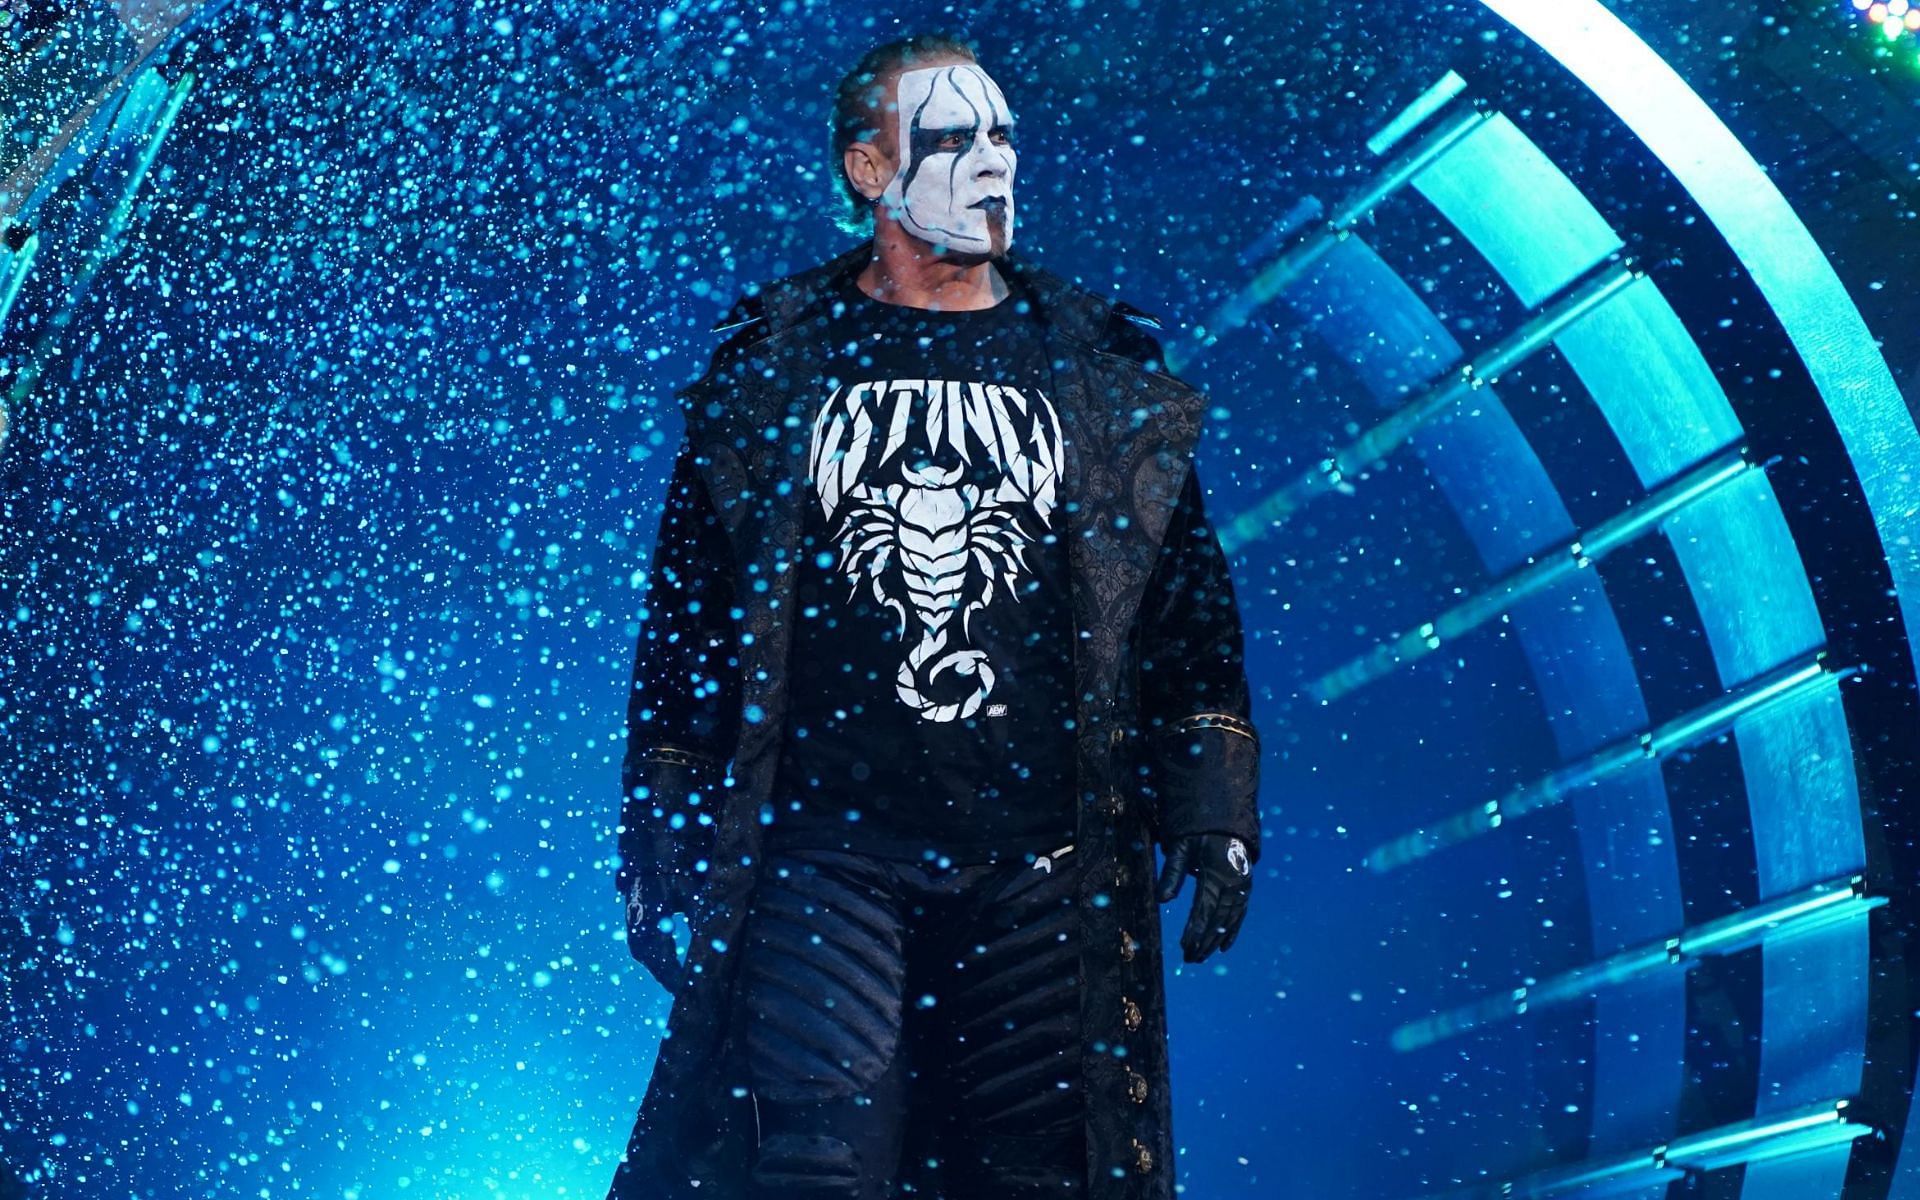 Sting signed with All Elite Wrestling in 2020